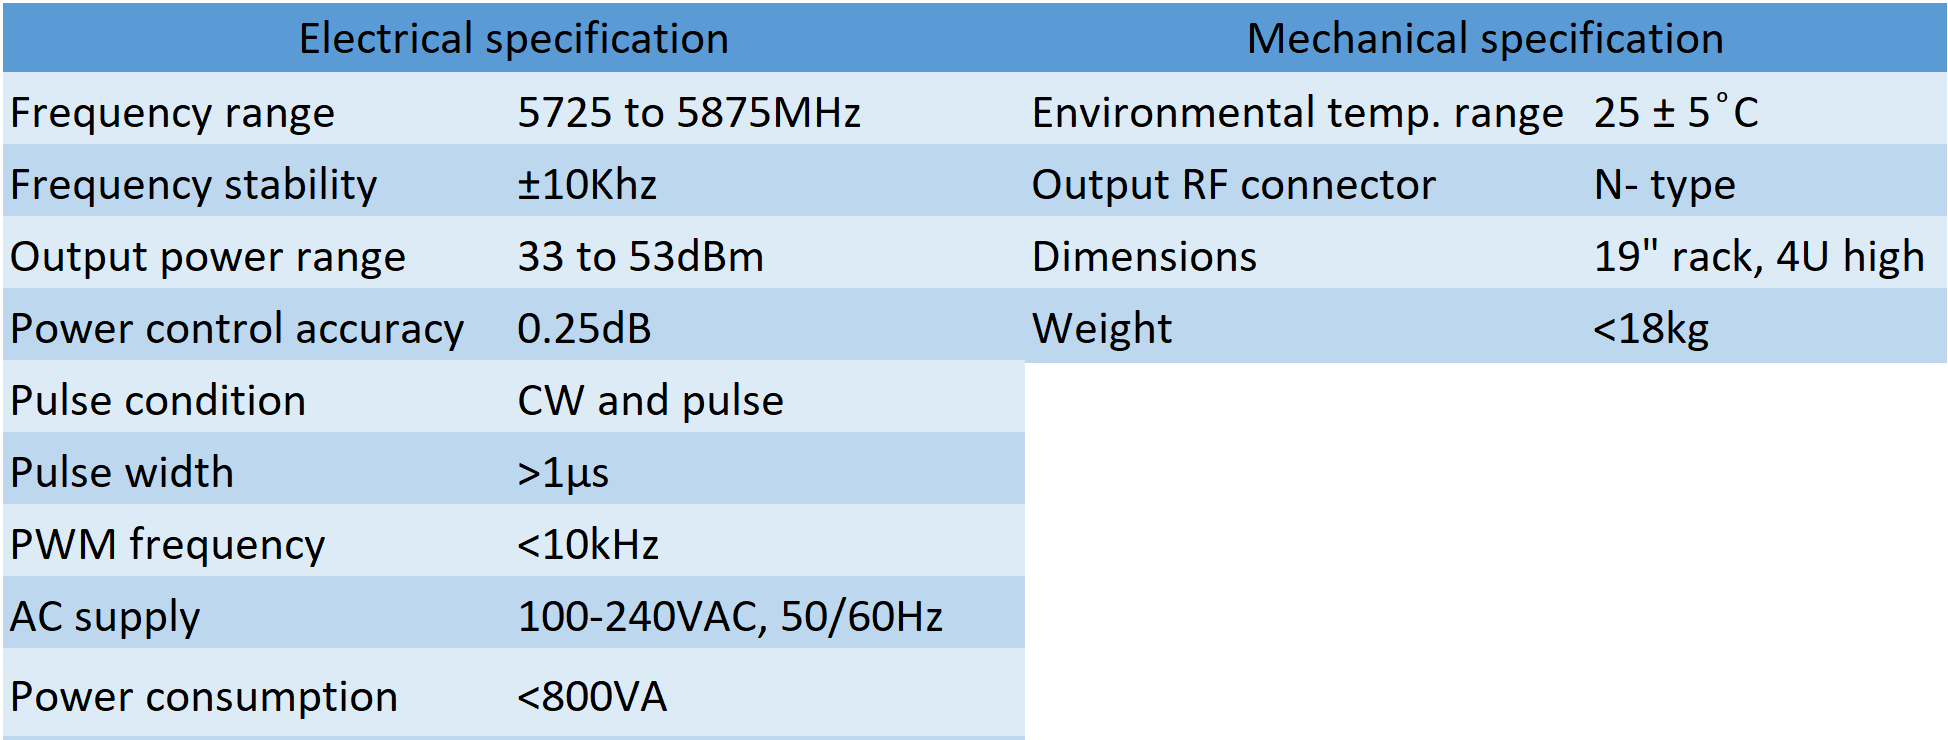 Specification of AT5g8GEN200